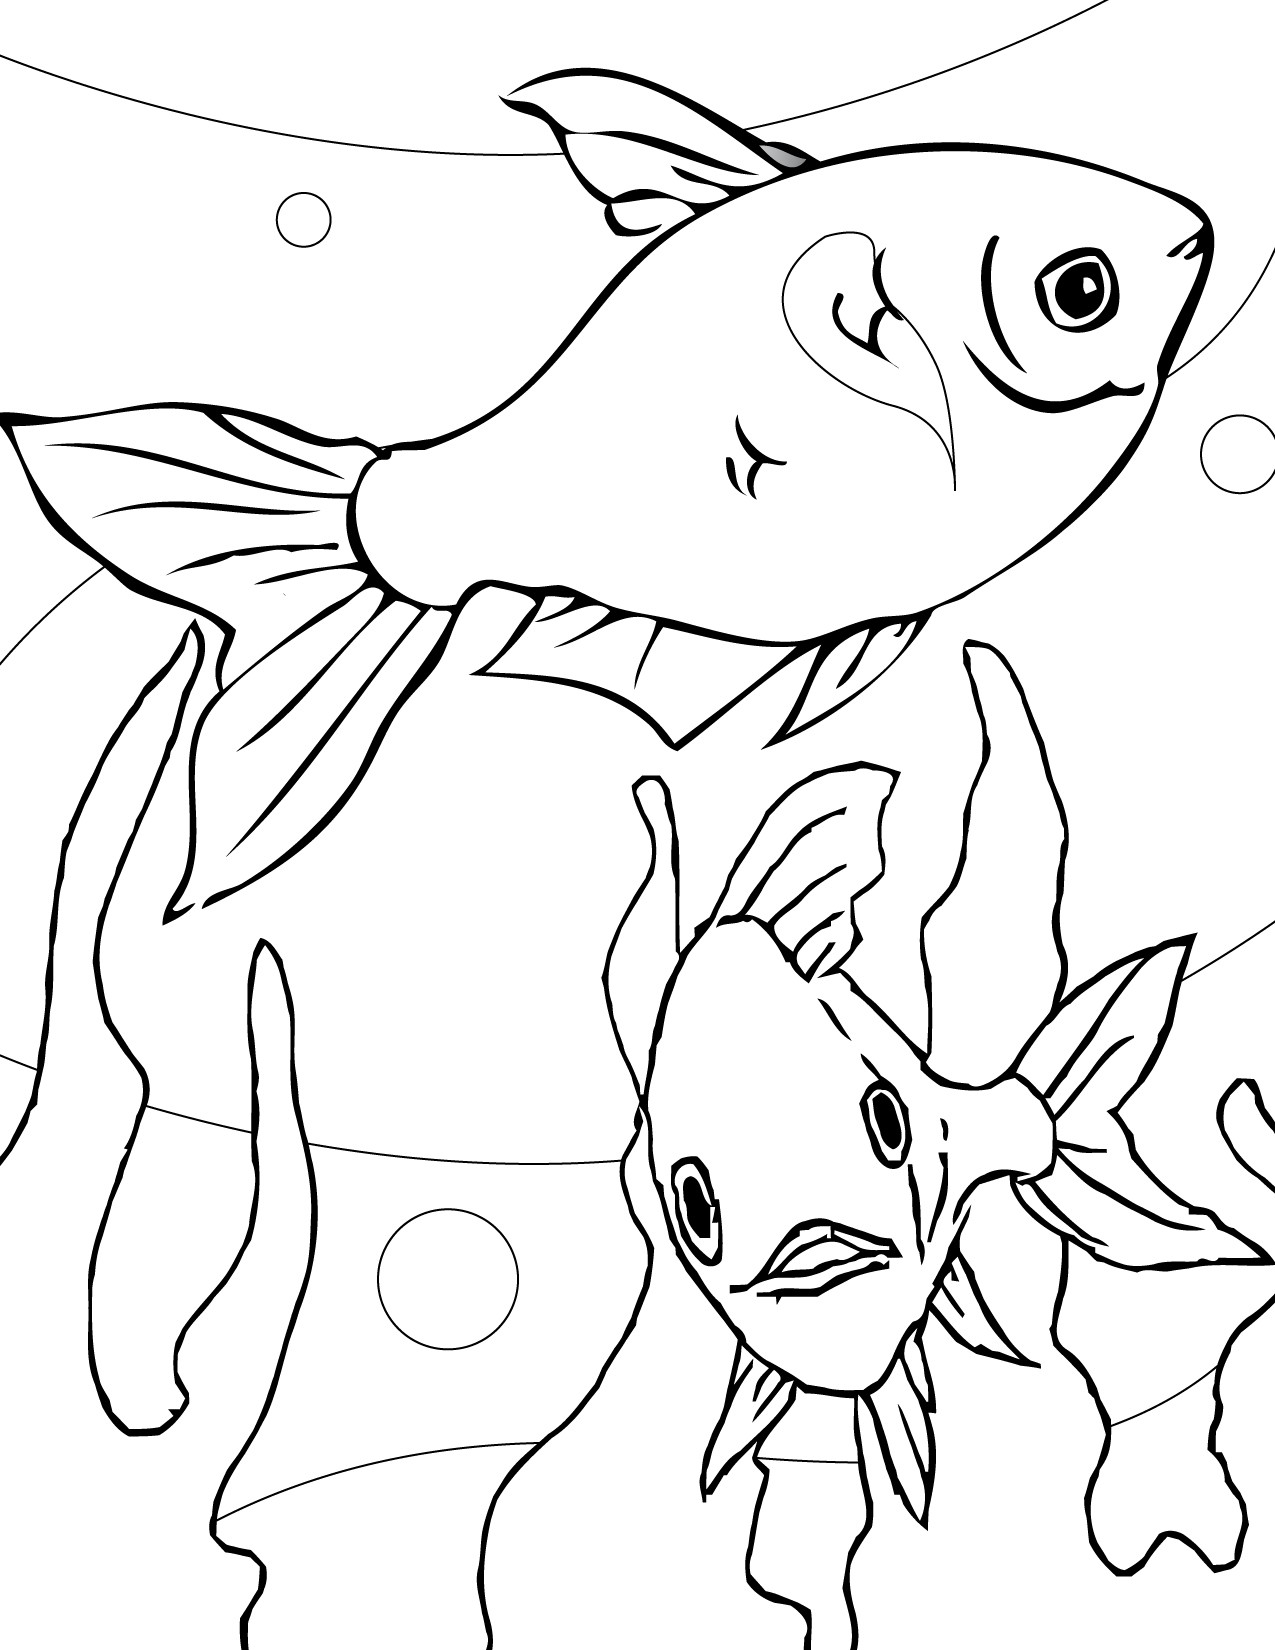 Dingo Coloring Page at GetColorings.com | Free printable colorings ...